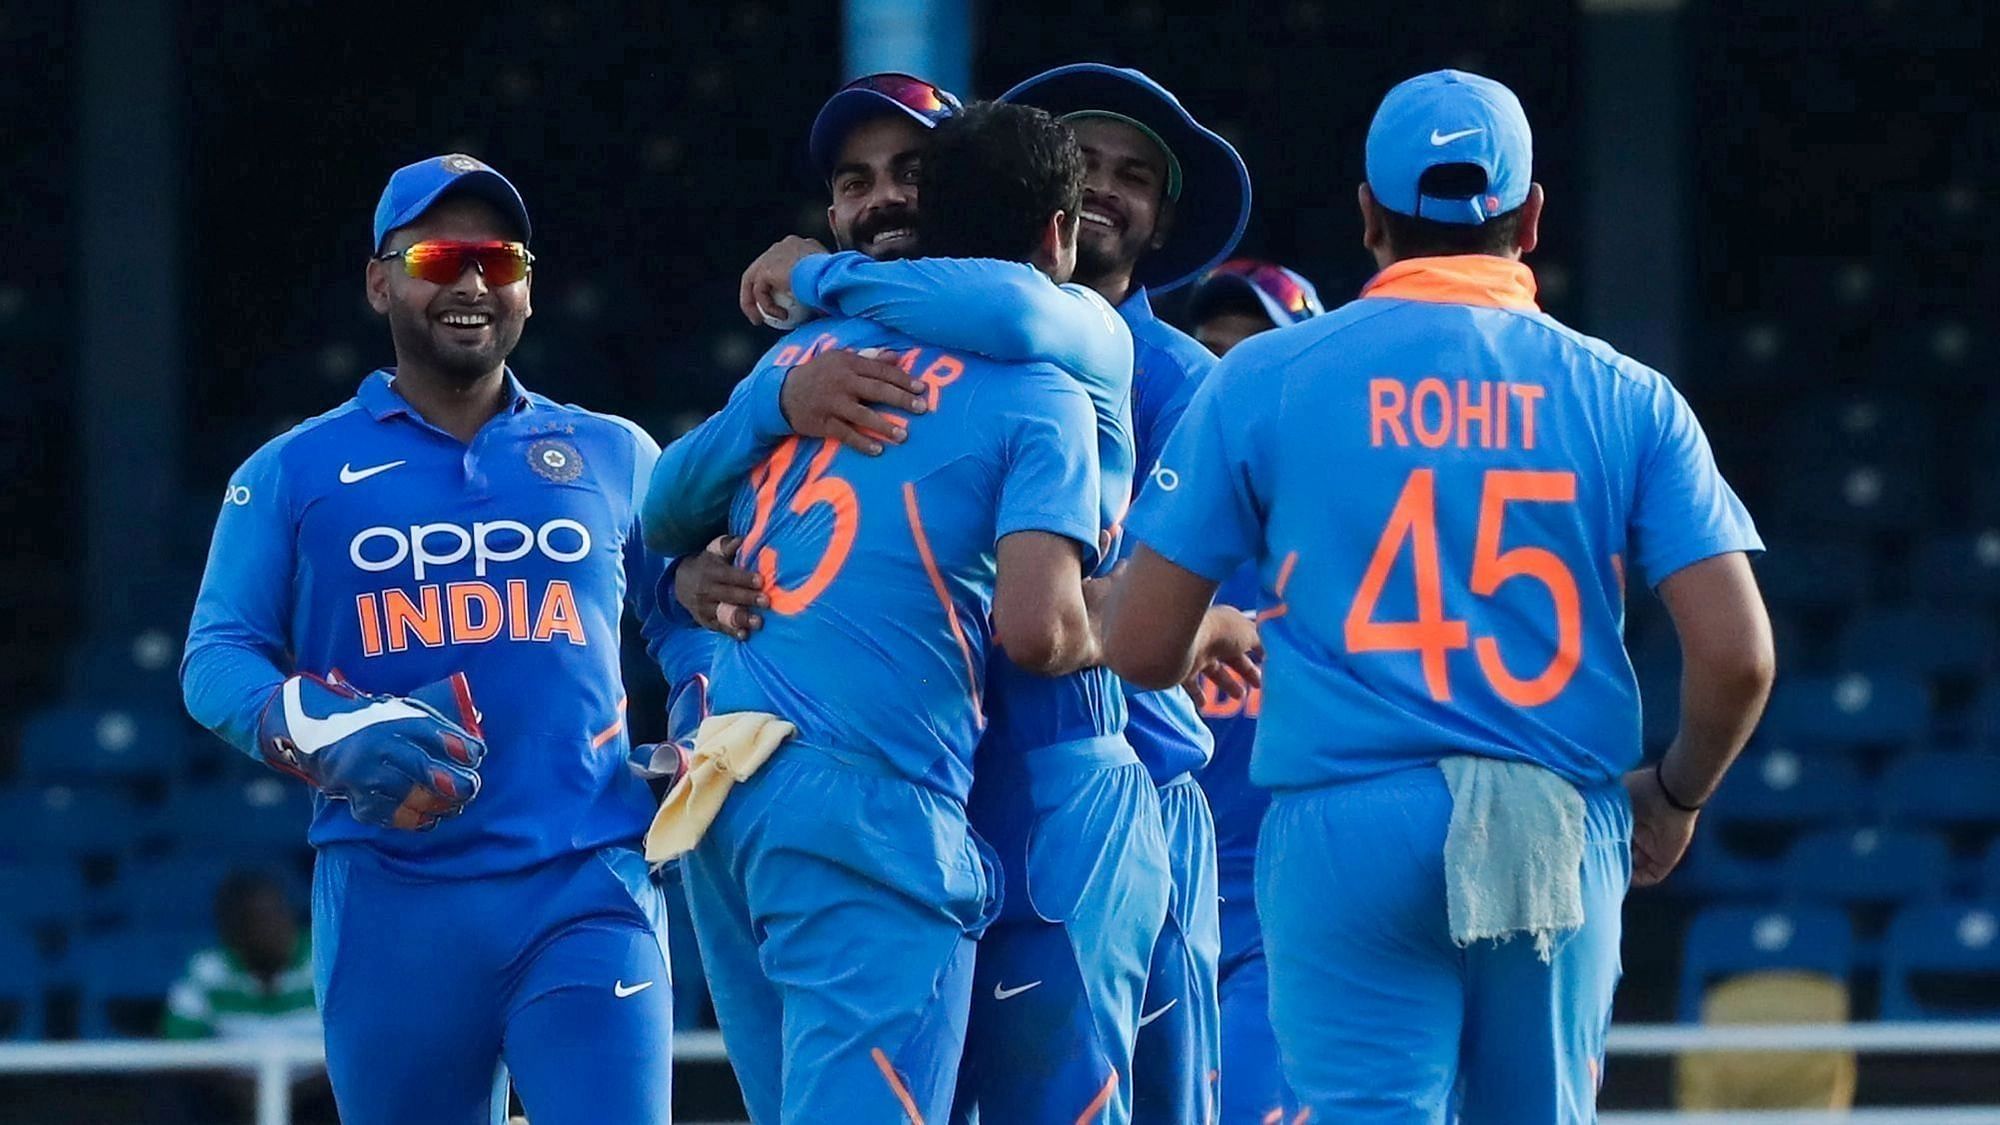 India vs West Indies 4th T20 Live Streaming When, Where and How To Watch